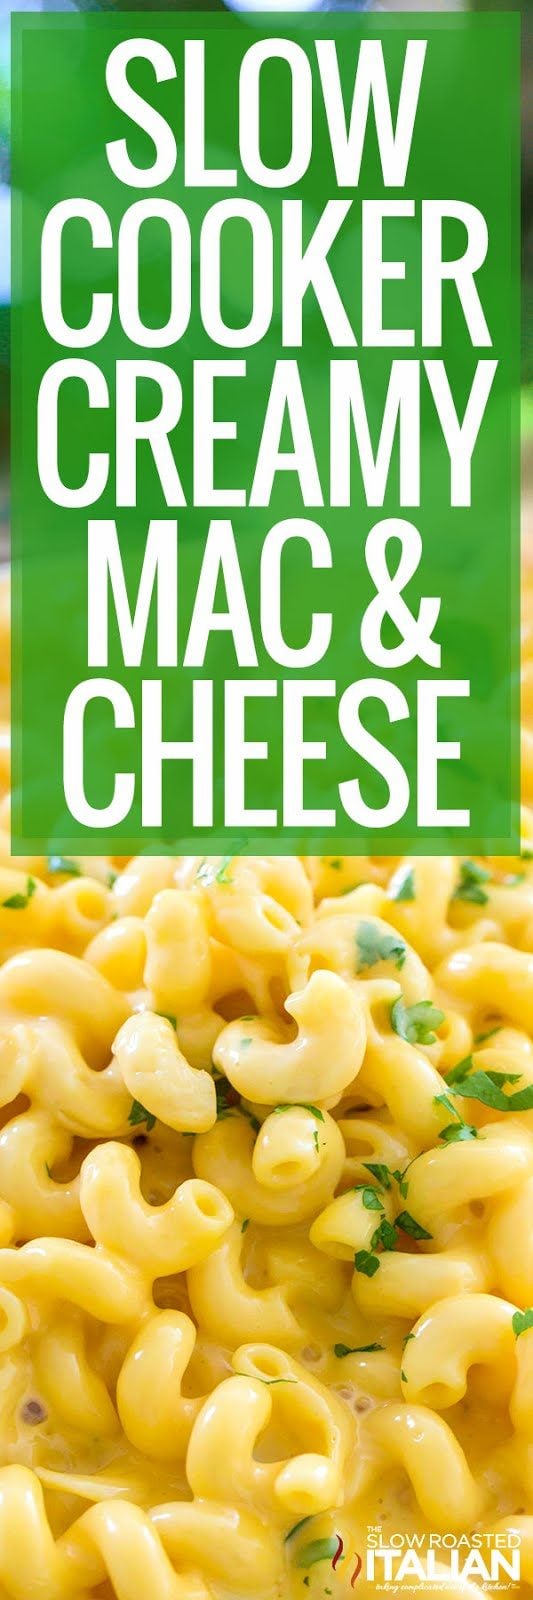 titled image (and shown): slow cooker creamy mac and cheese